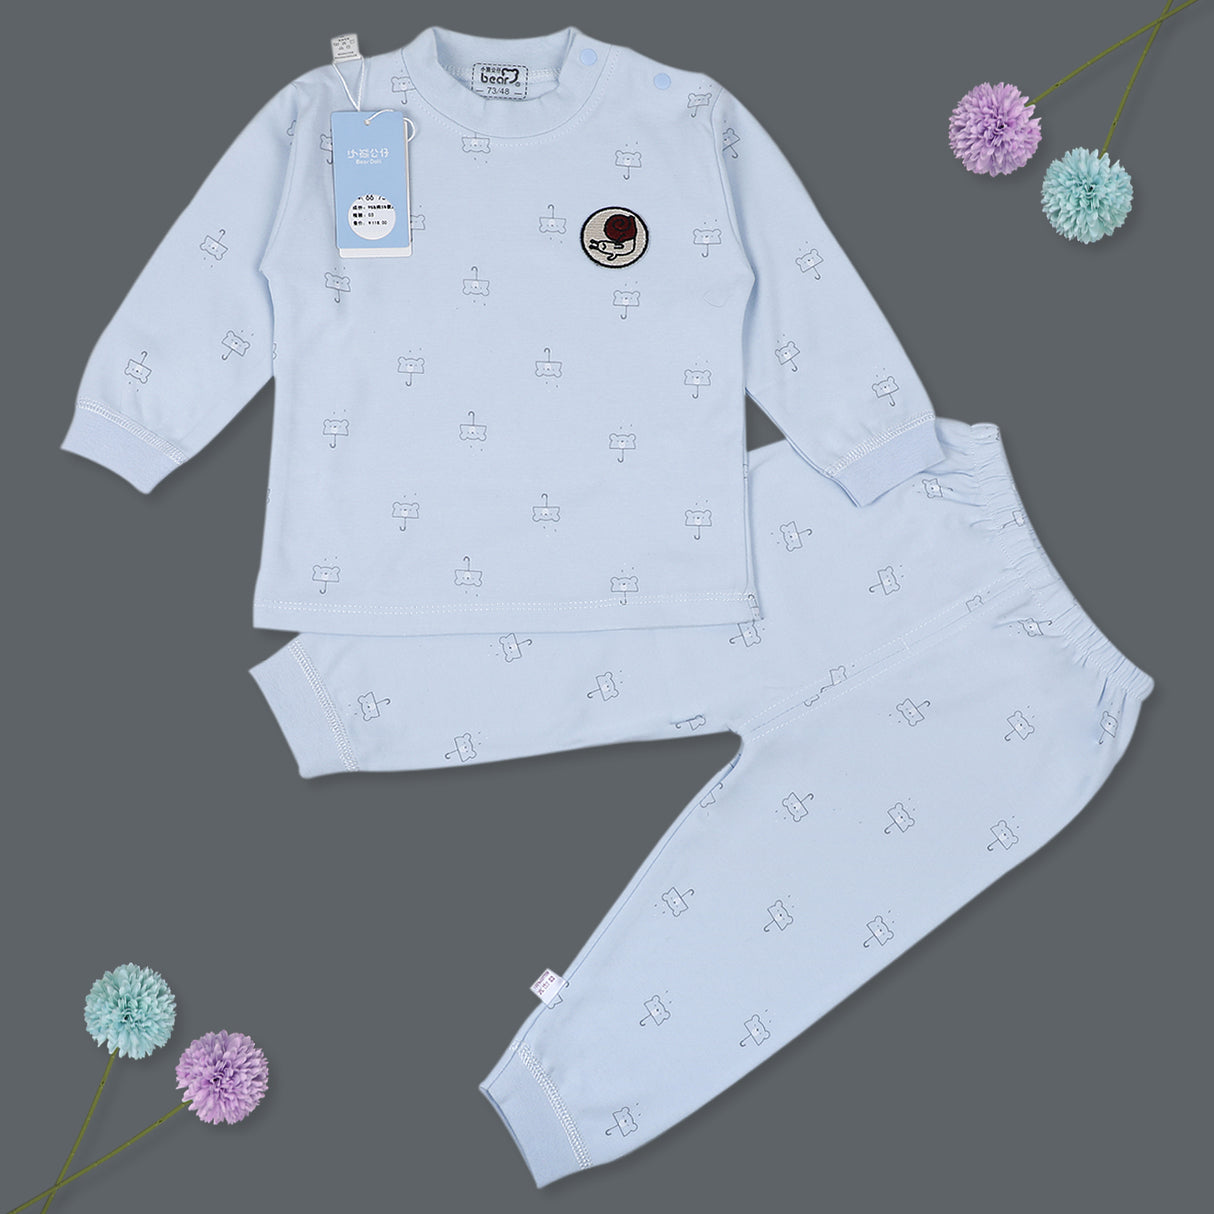 Snail Full Sleeves Top And Pyjama Side Buttoned Cotton Night Suit